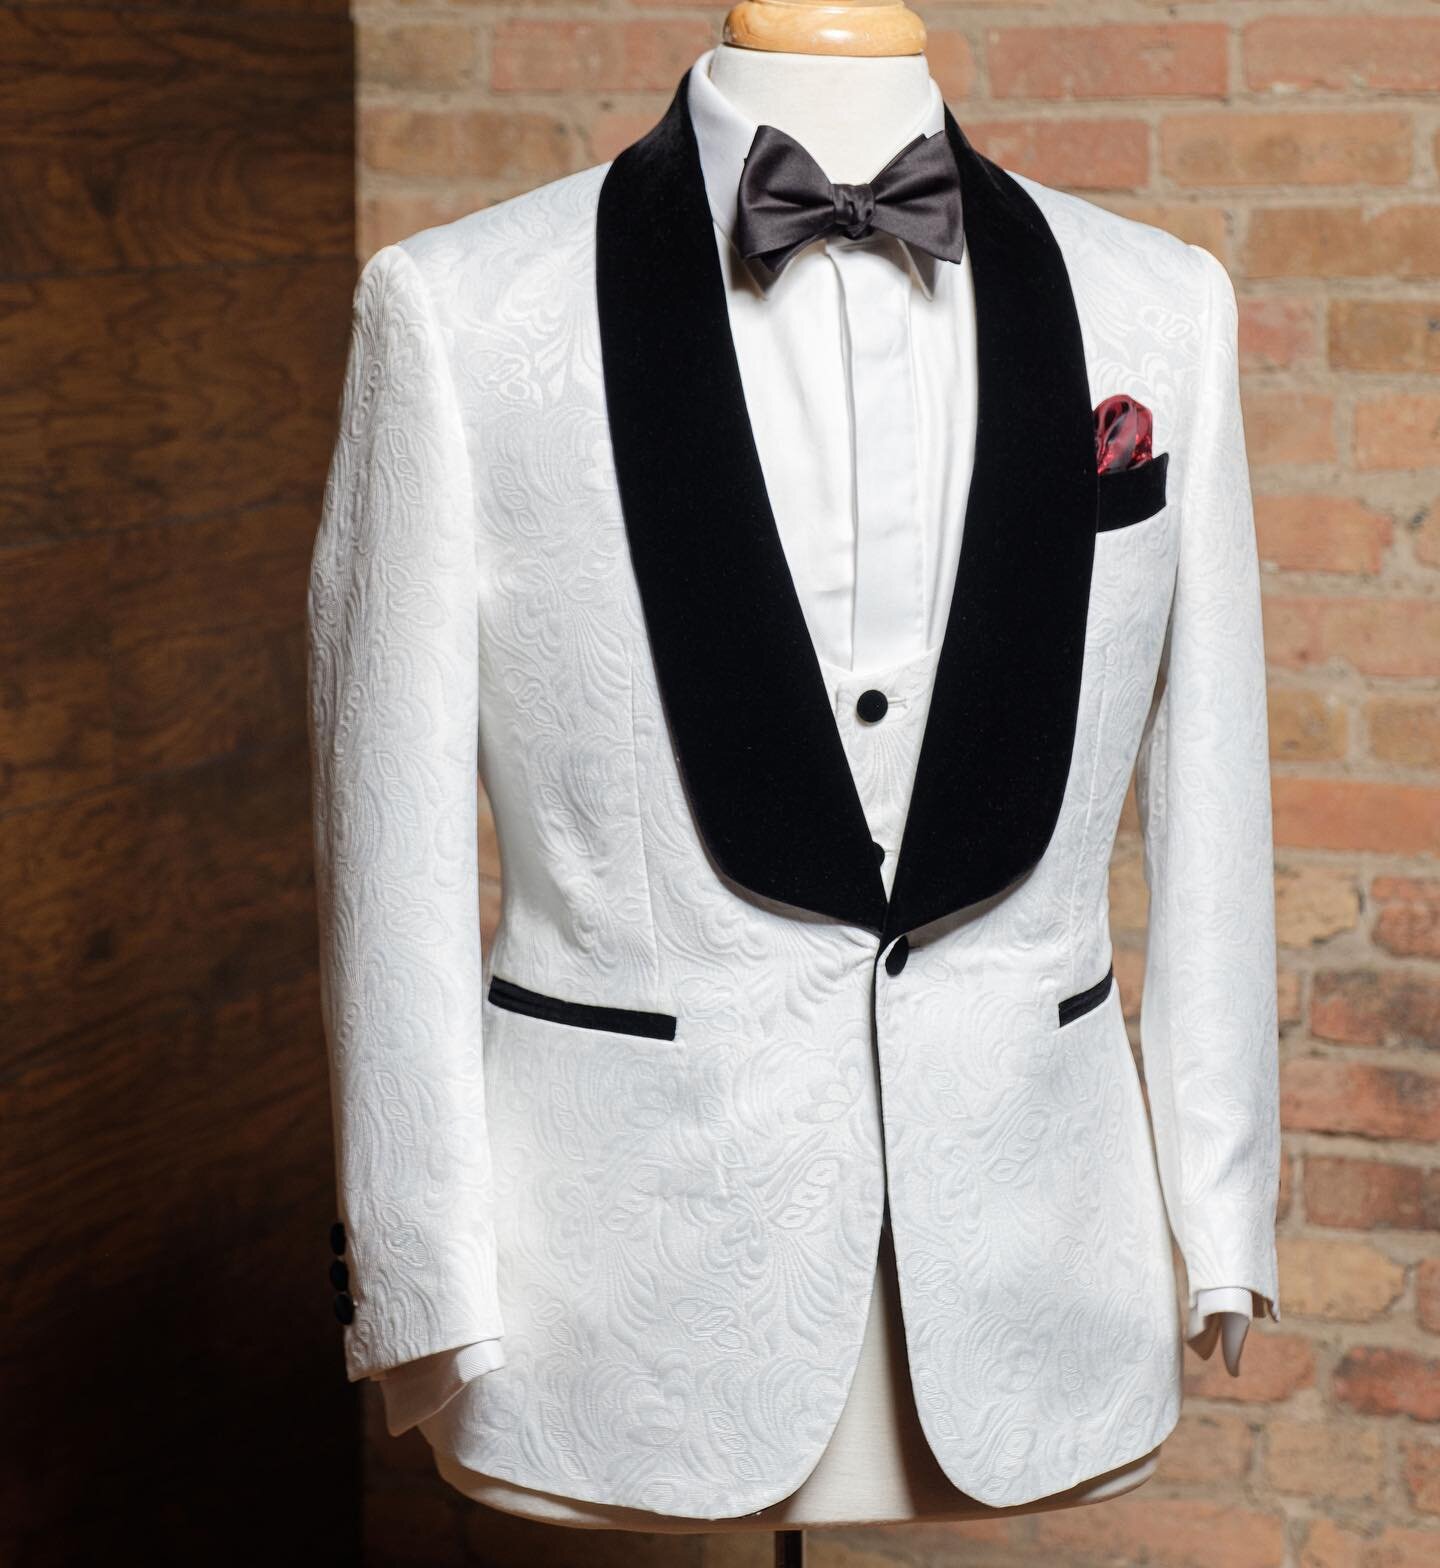 As wedding season approaches, it's time to start thinking about that perfect Tuxedo. 

At Alessandro Pir&egrave;s we take pride in making sure our grooms look perfect for their special day. 
As we walk you through the process of designing your perfec